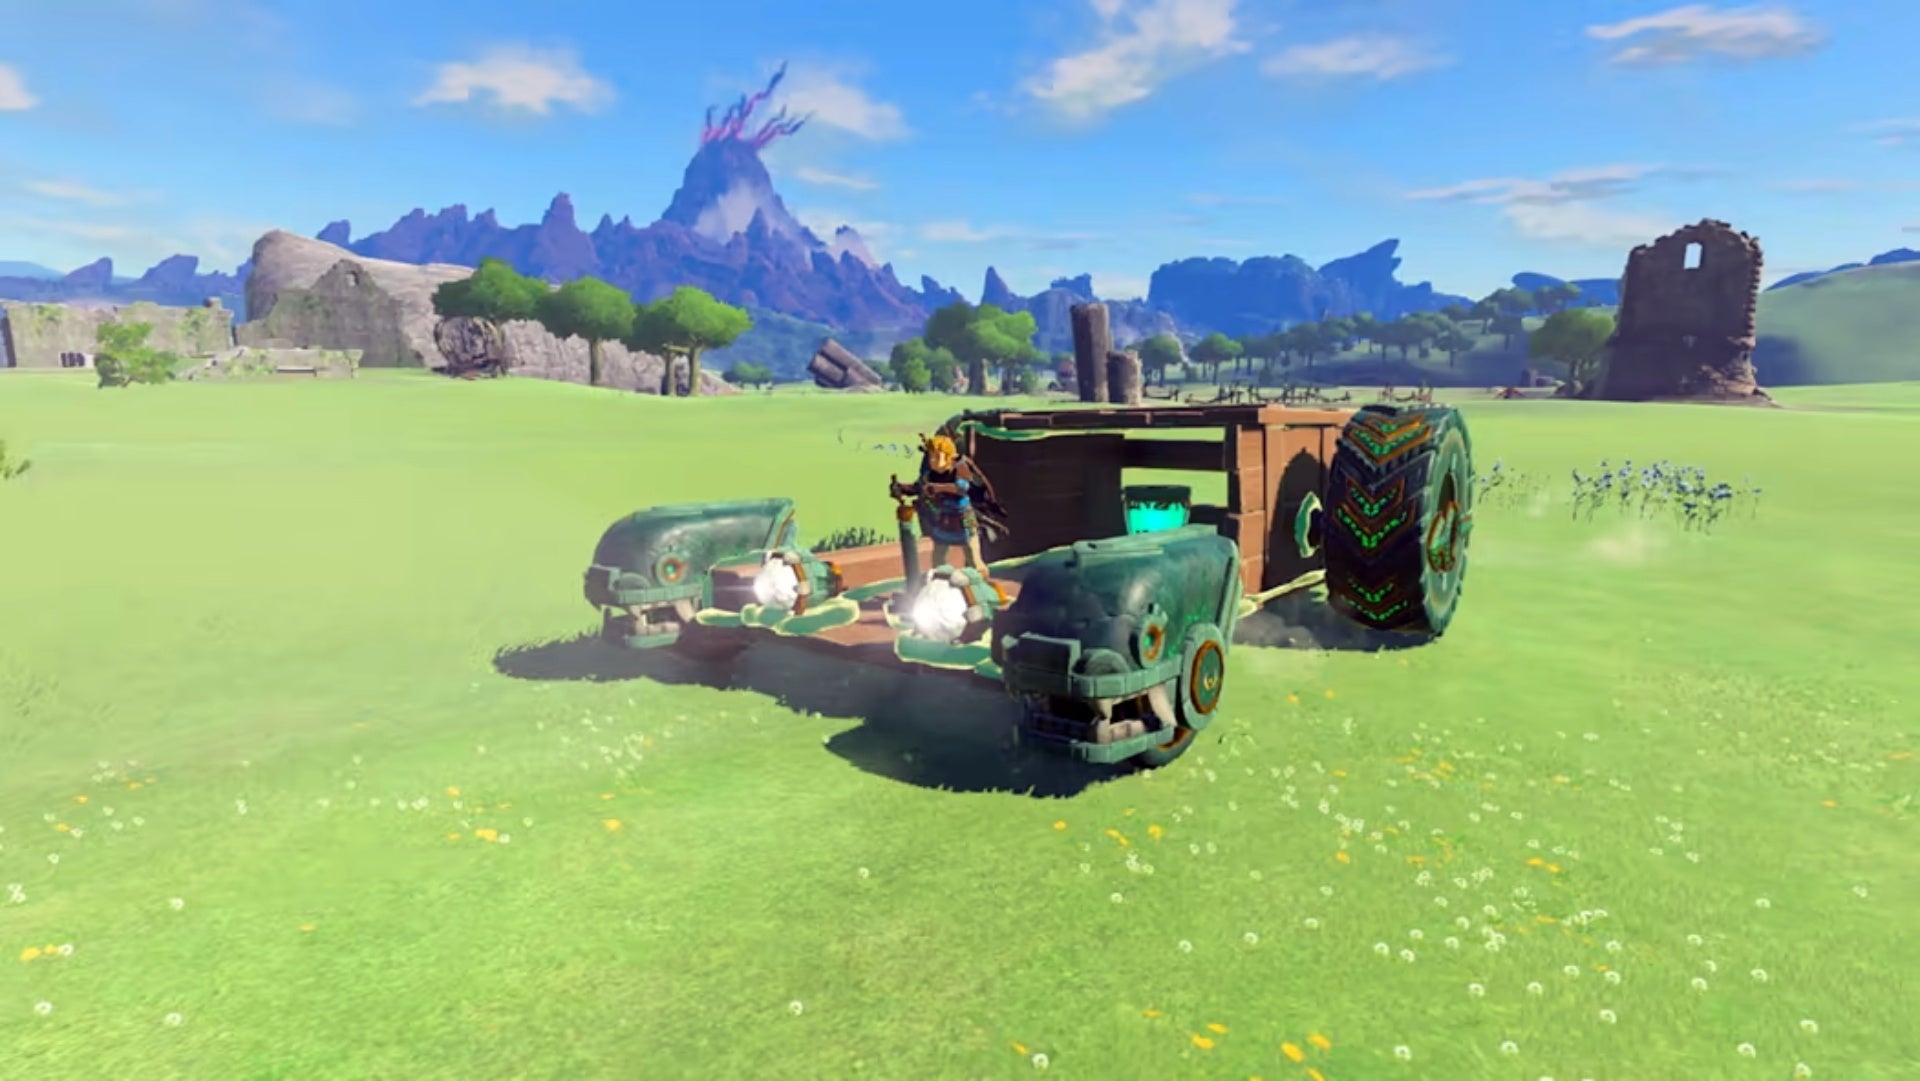 Swerving through The Great Plateau. (Image: Nintendo)